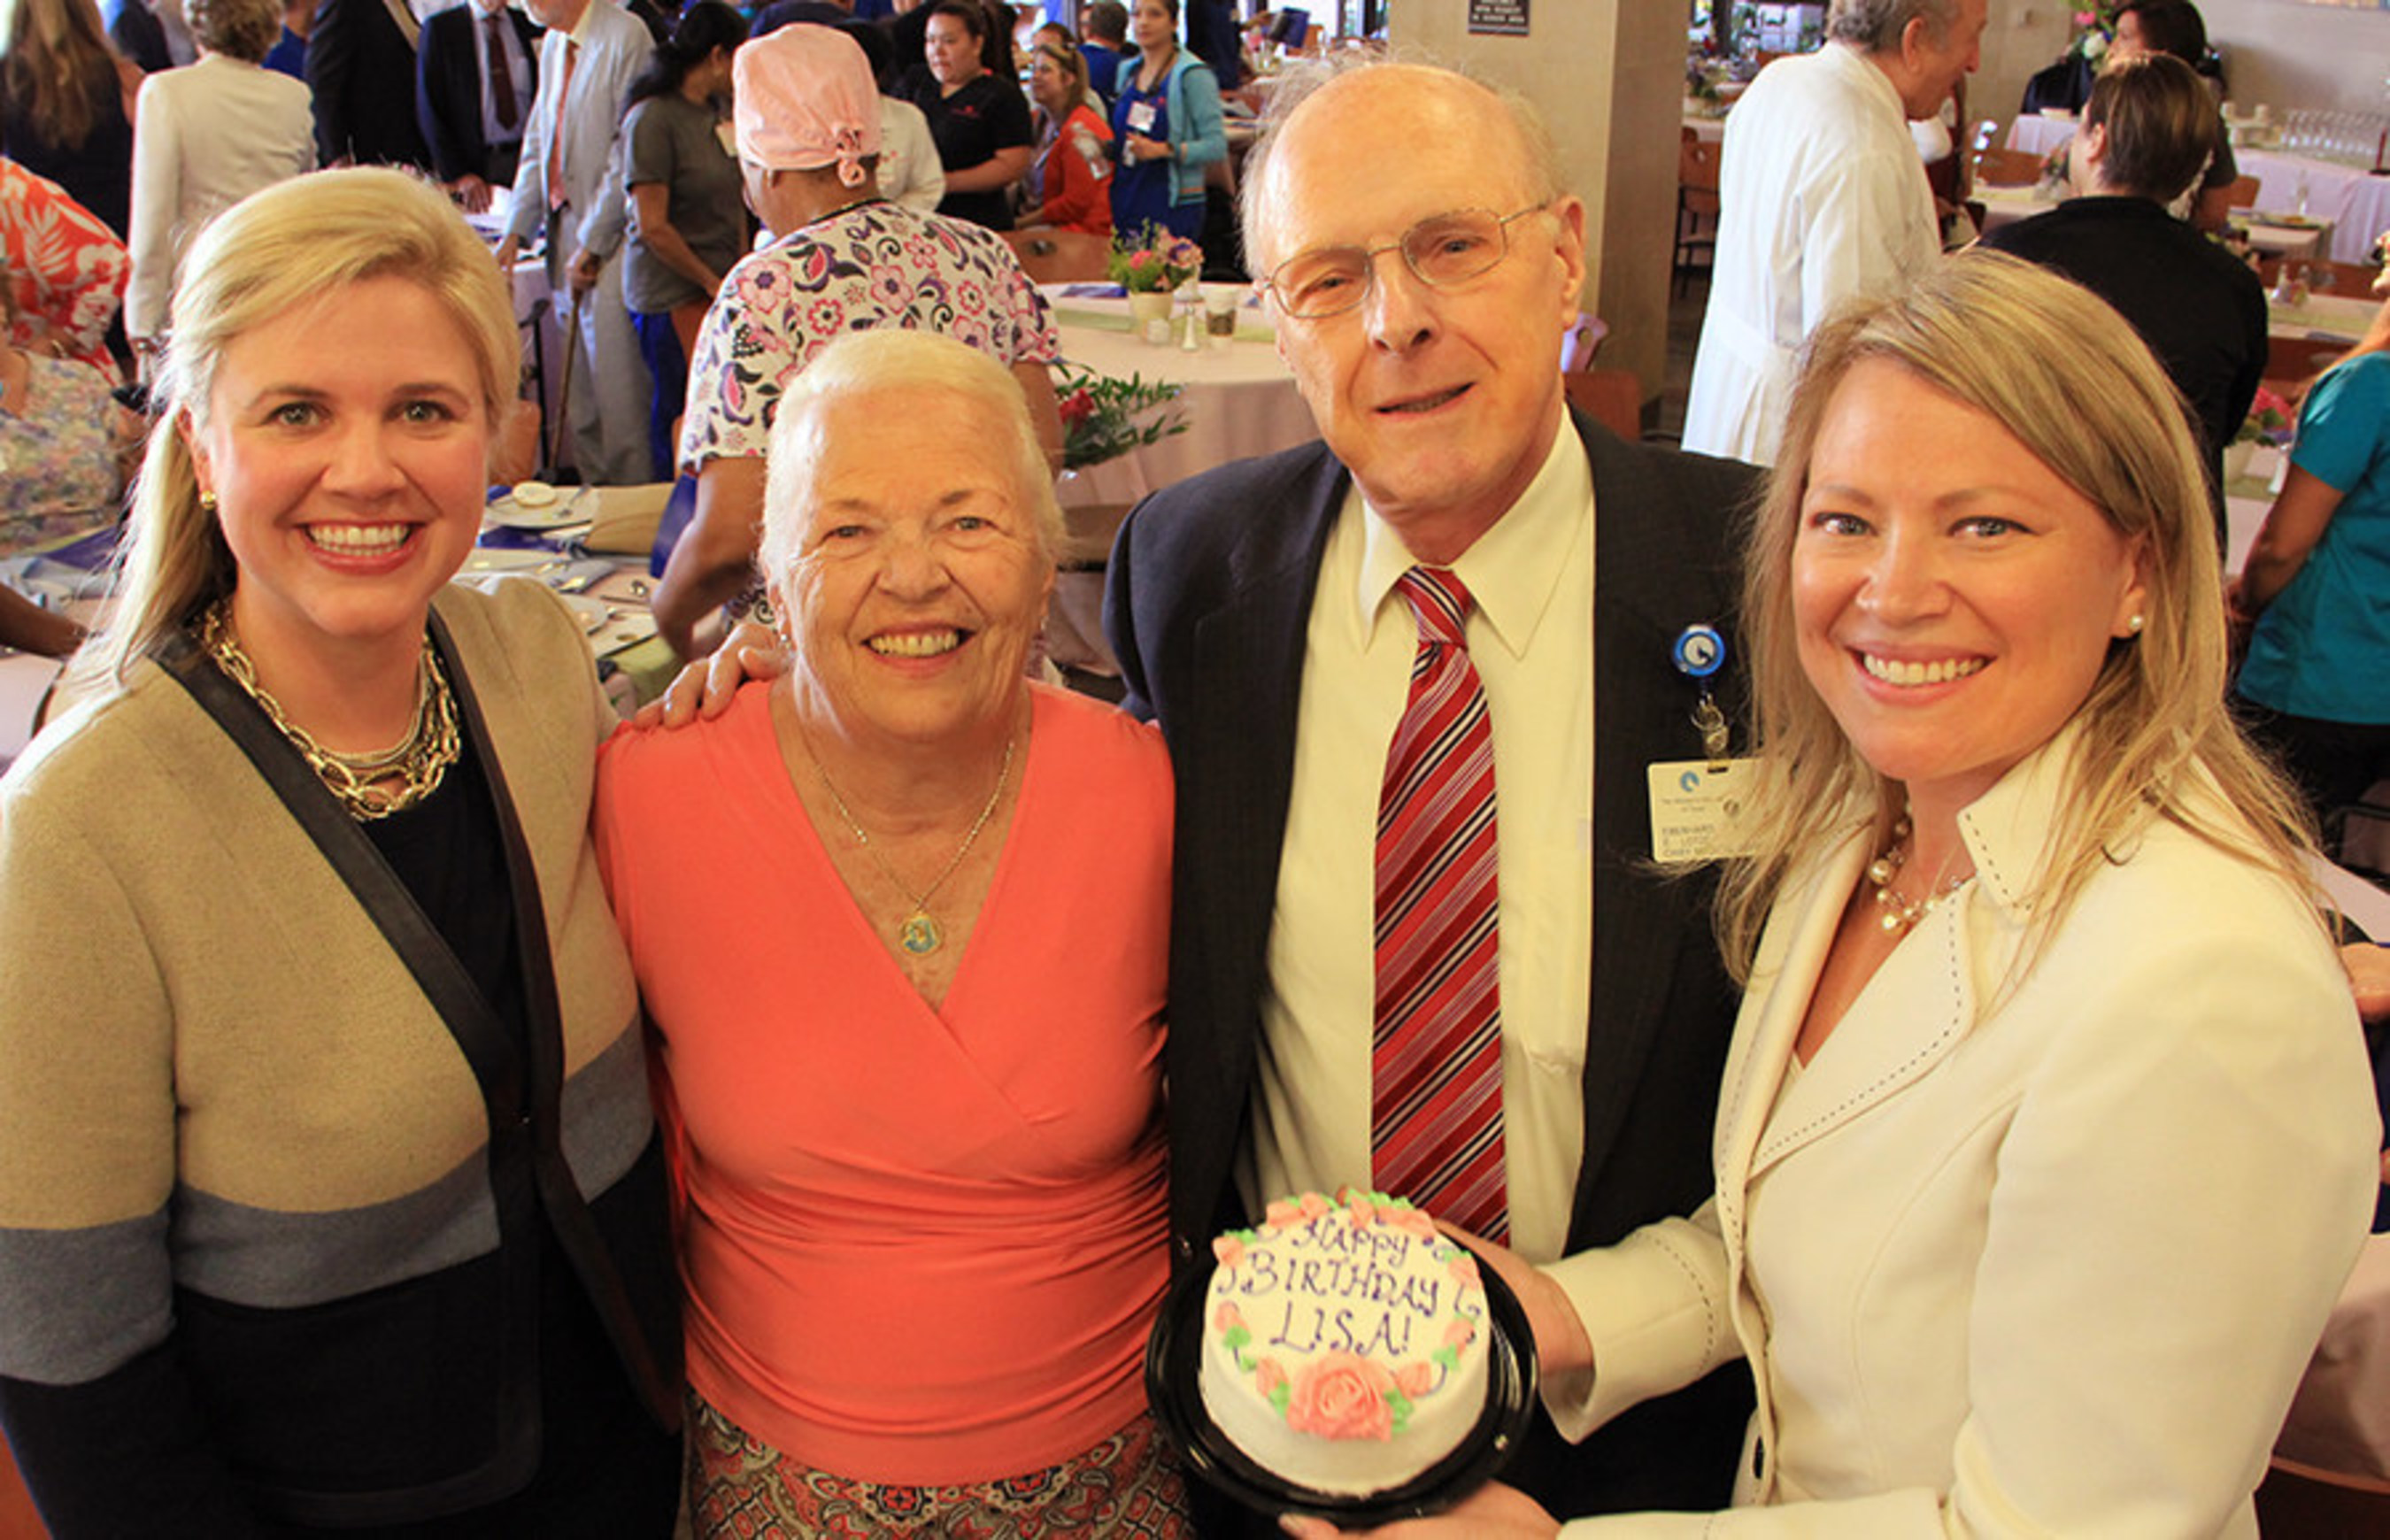 (Left to Right) The Woman's Hospital of Texas CEO Ashley McClellan celebrates the hospital's 40th anniversary with Ann Wagner, one of the first patients to deliver her baby, Lisa Woods, on opening day, Dr. Eberhard Lotze, Ms. Wagner's obstetrician and a hospital founder, and Lisa Woods.